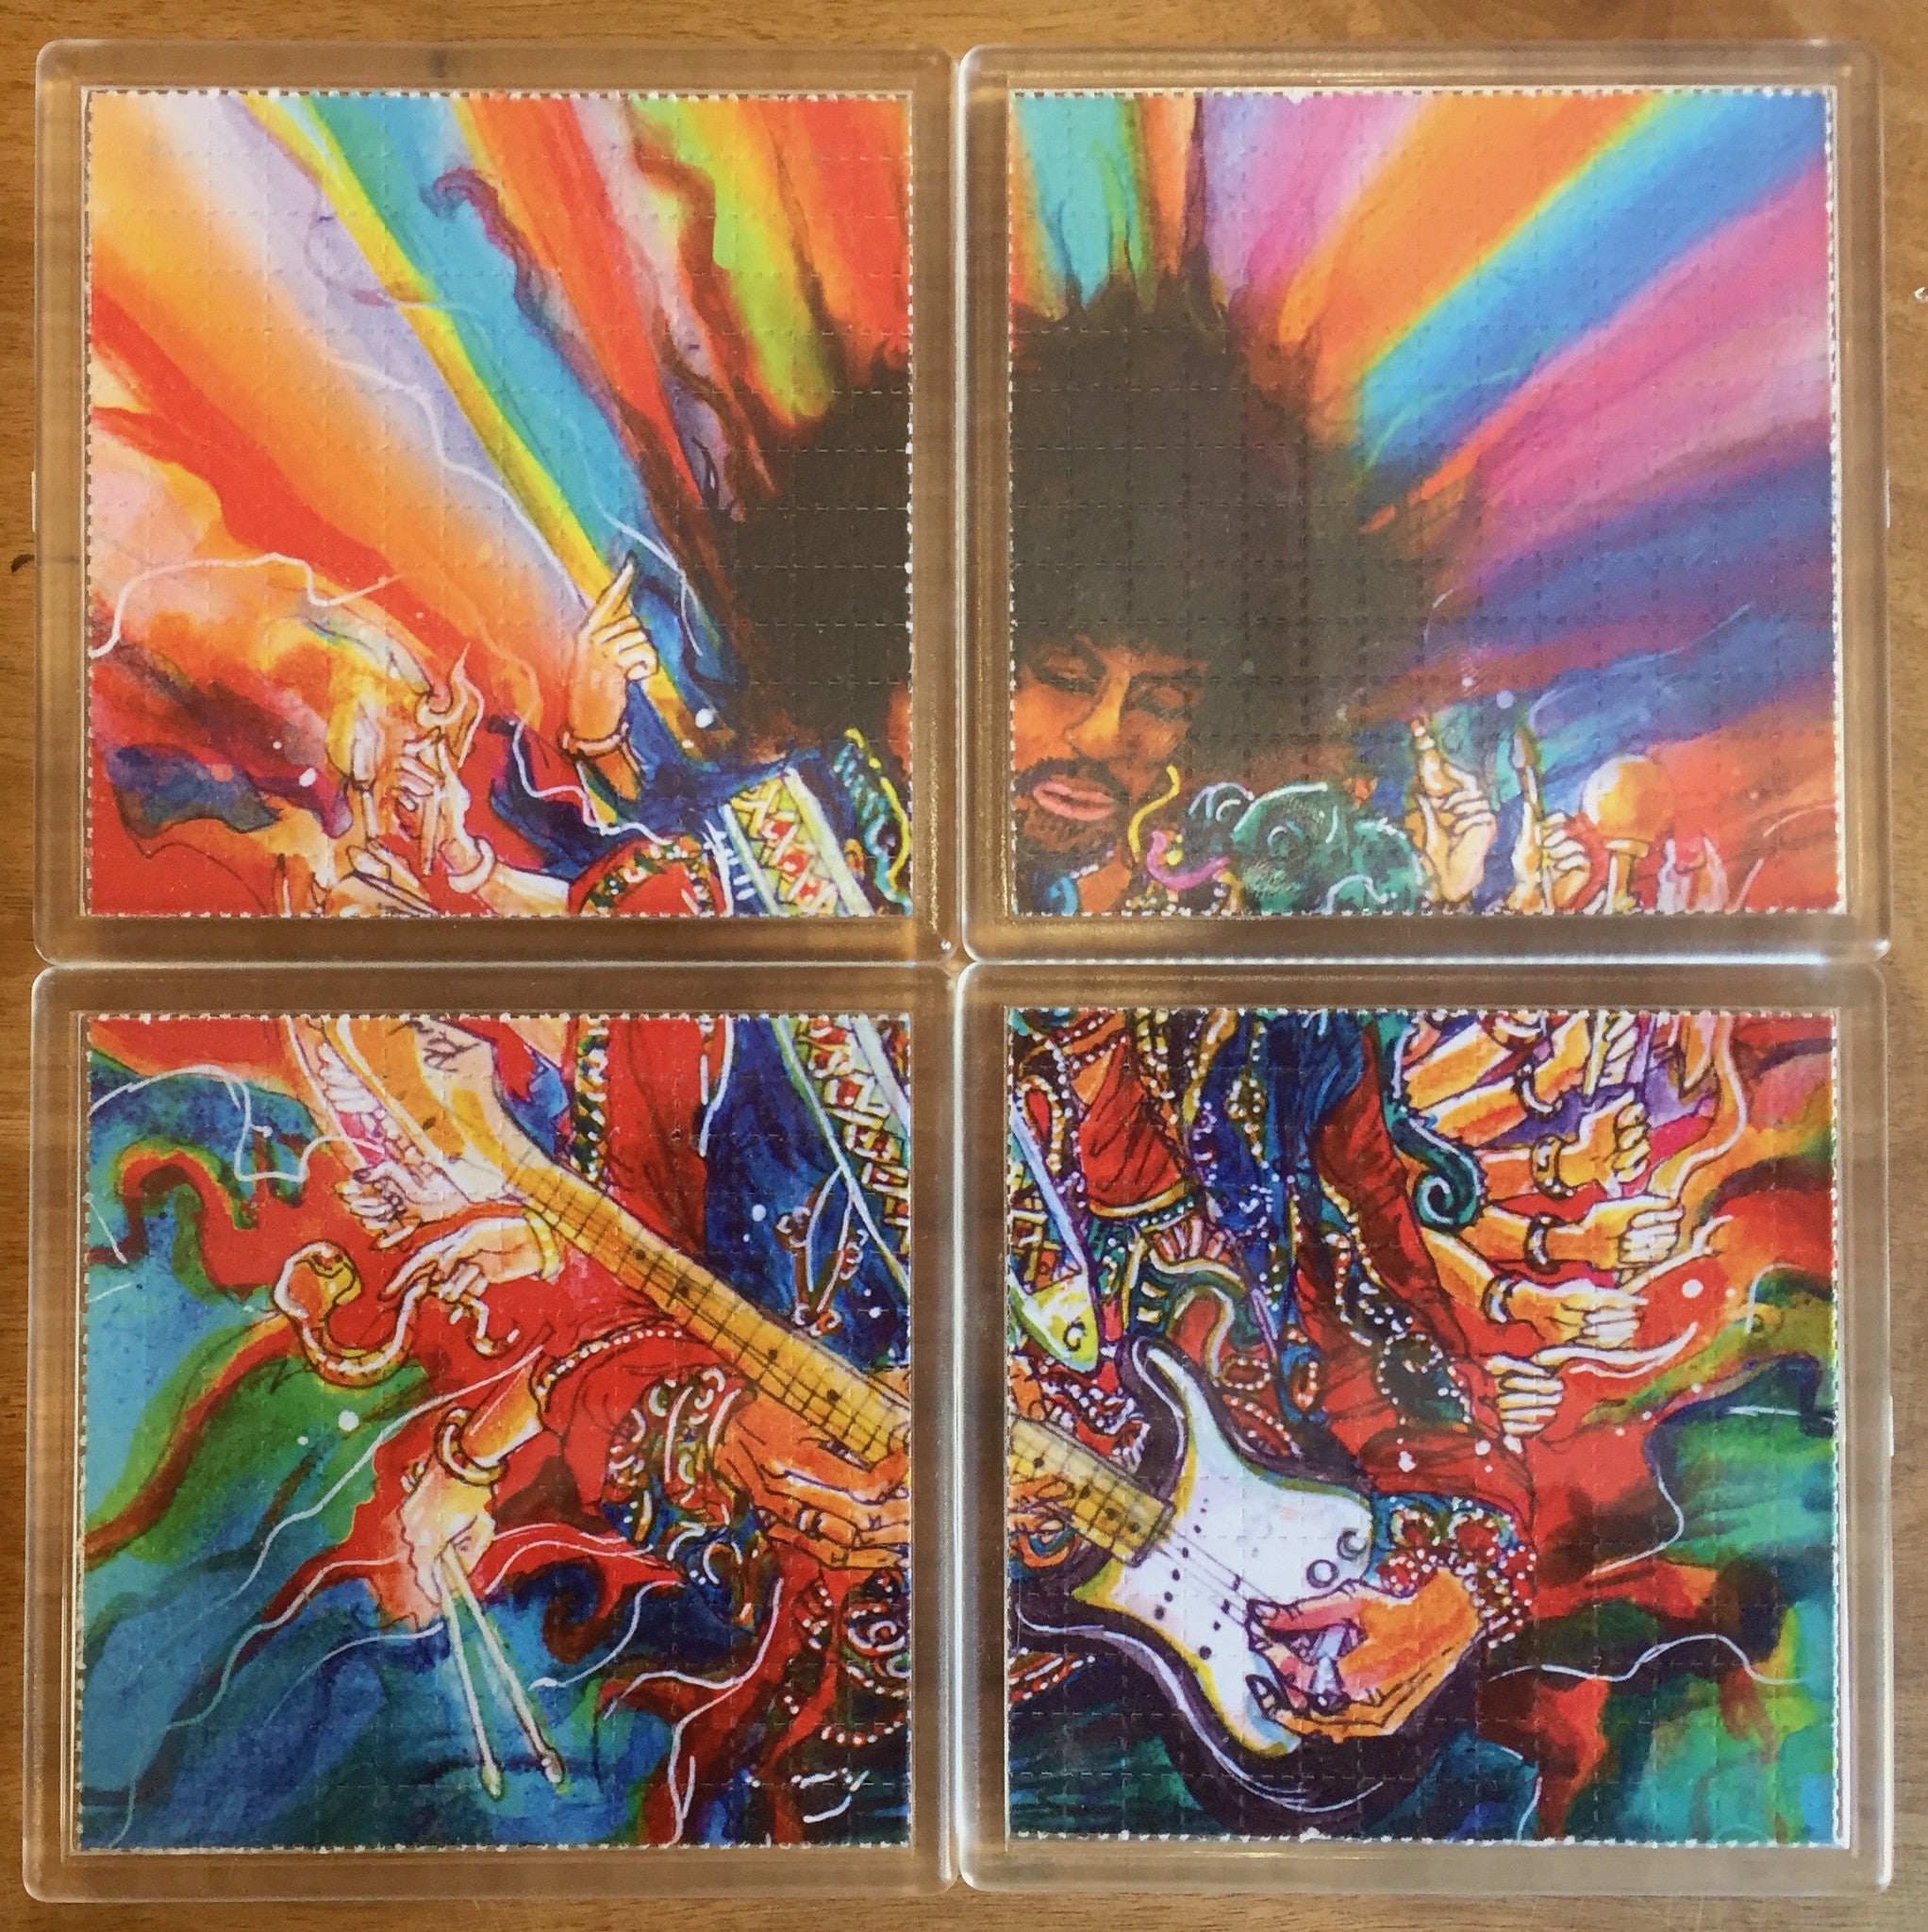 Jimi Hendrix - Psychedelic - Blotter Art - Highly Collectible Artwork Blotter Paper Coaster (4 pack)